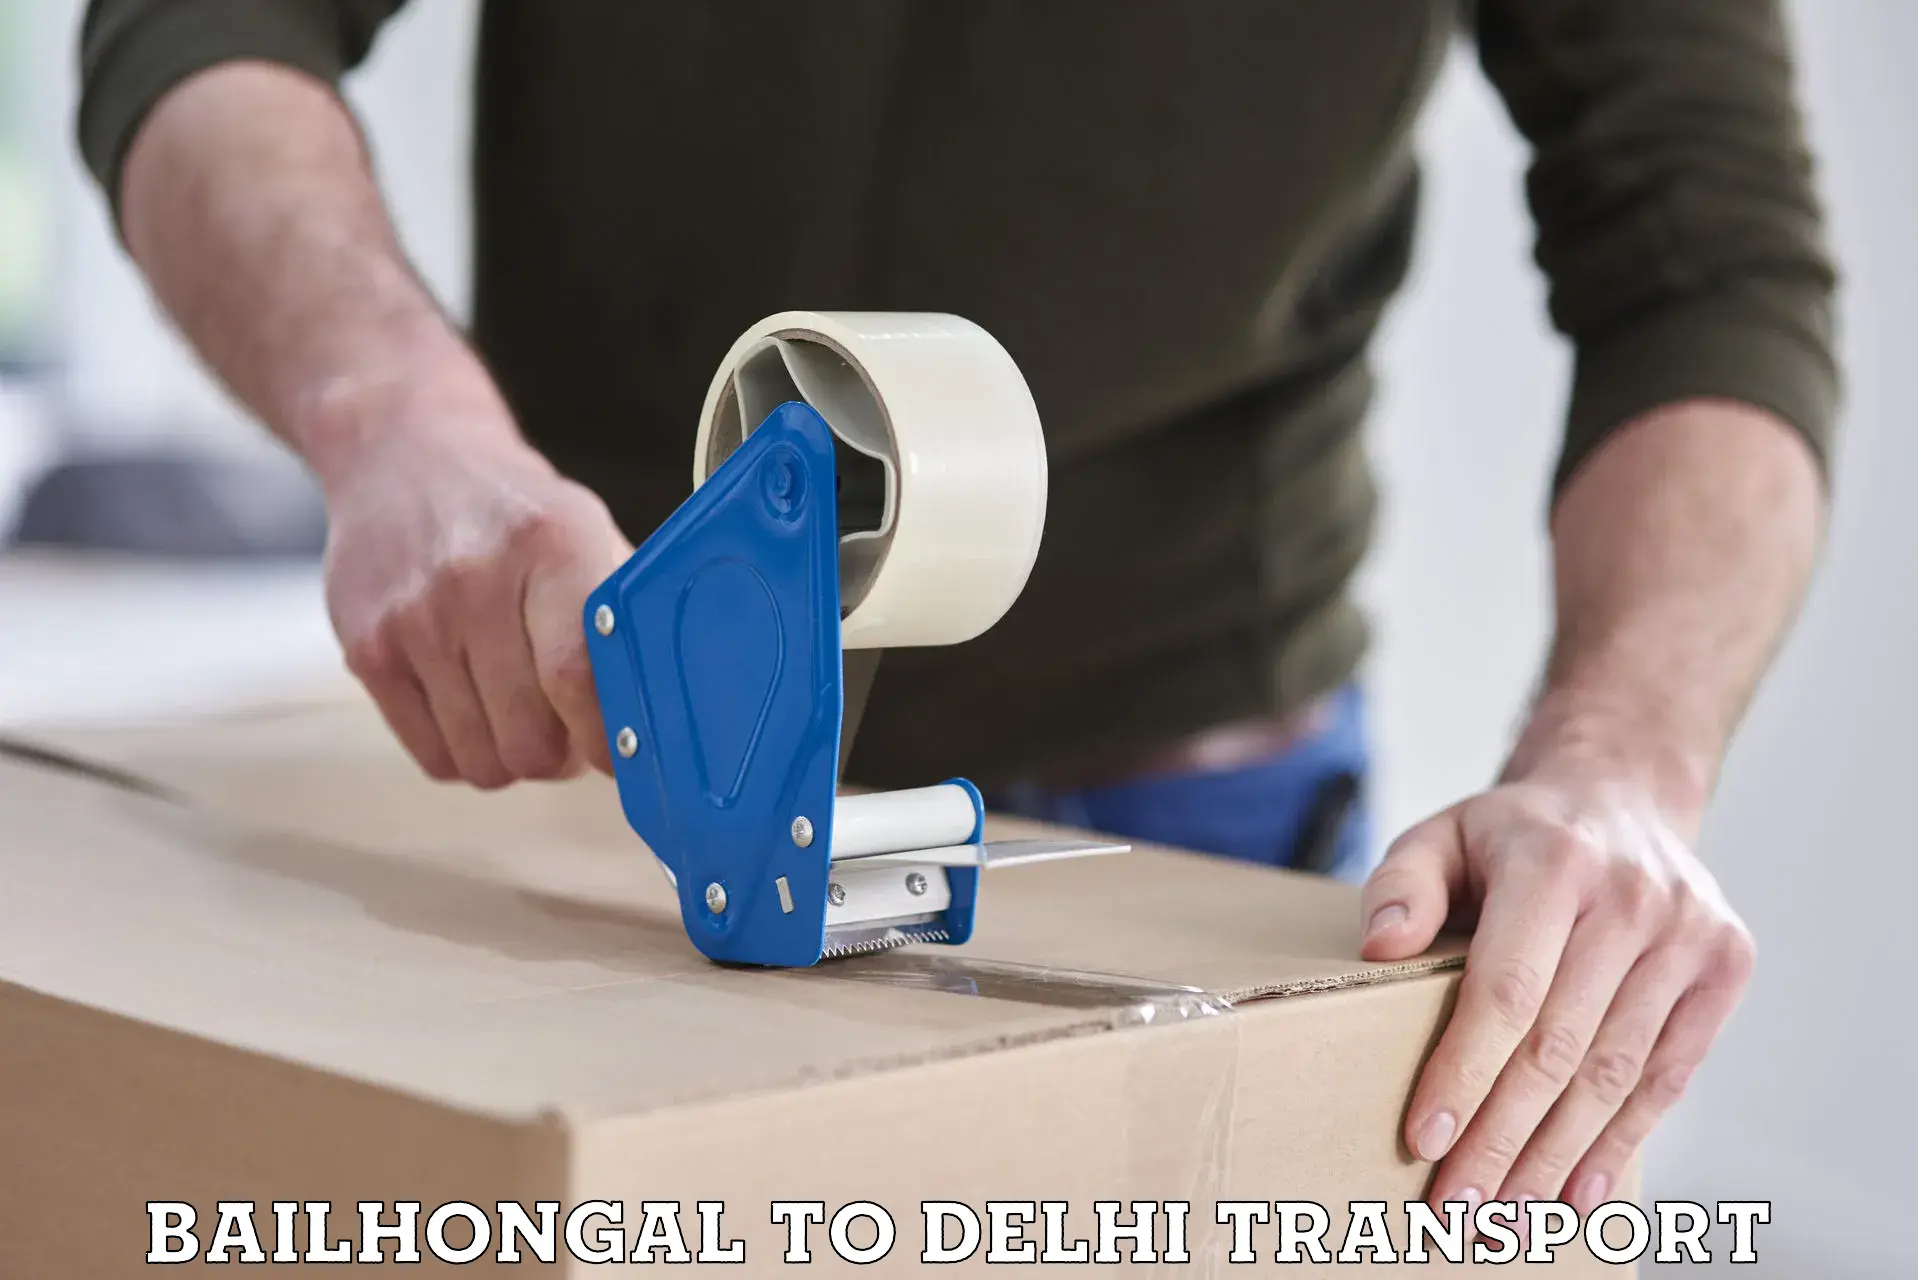 Nationwide transport services Bailhongal to NCR